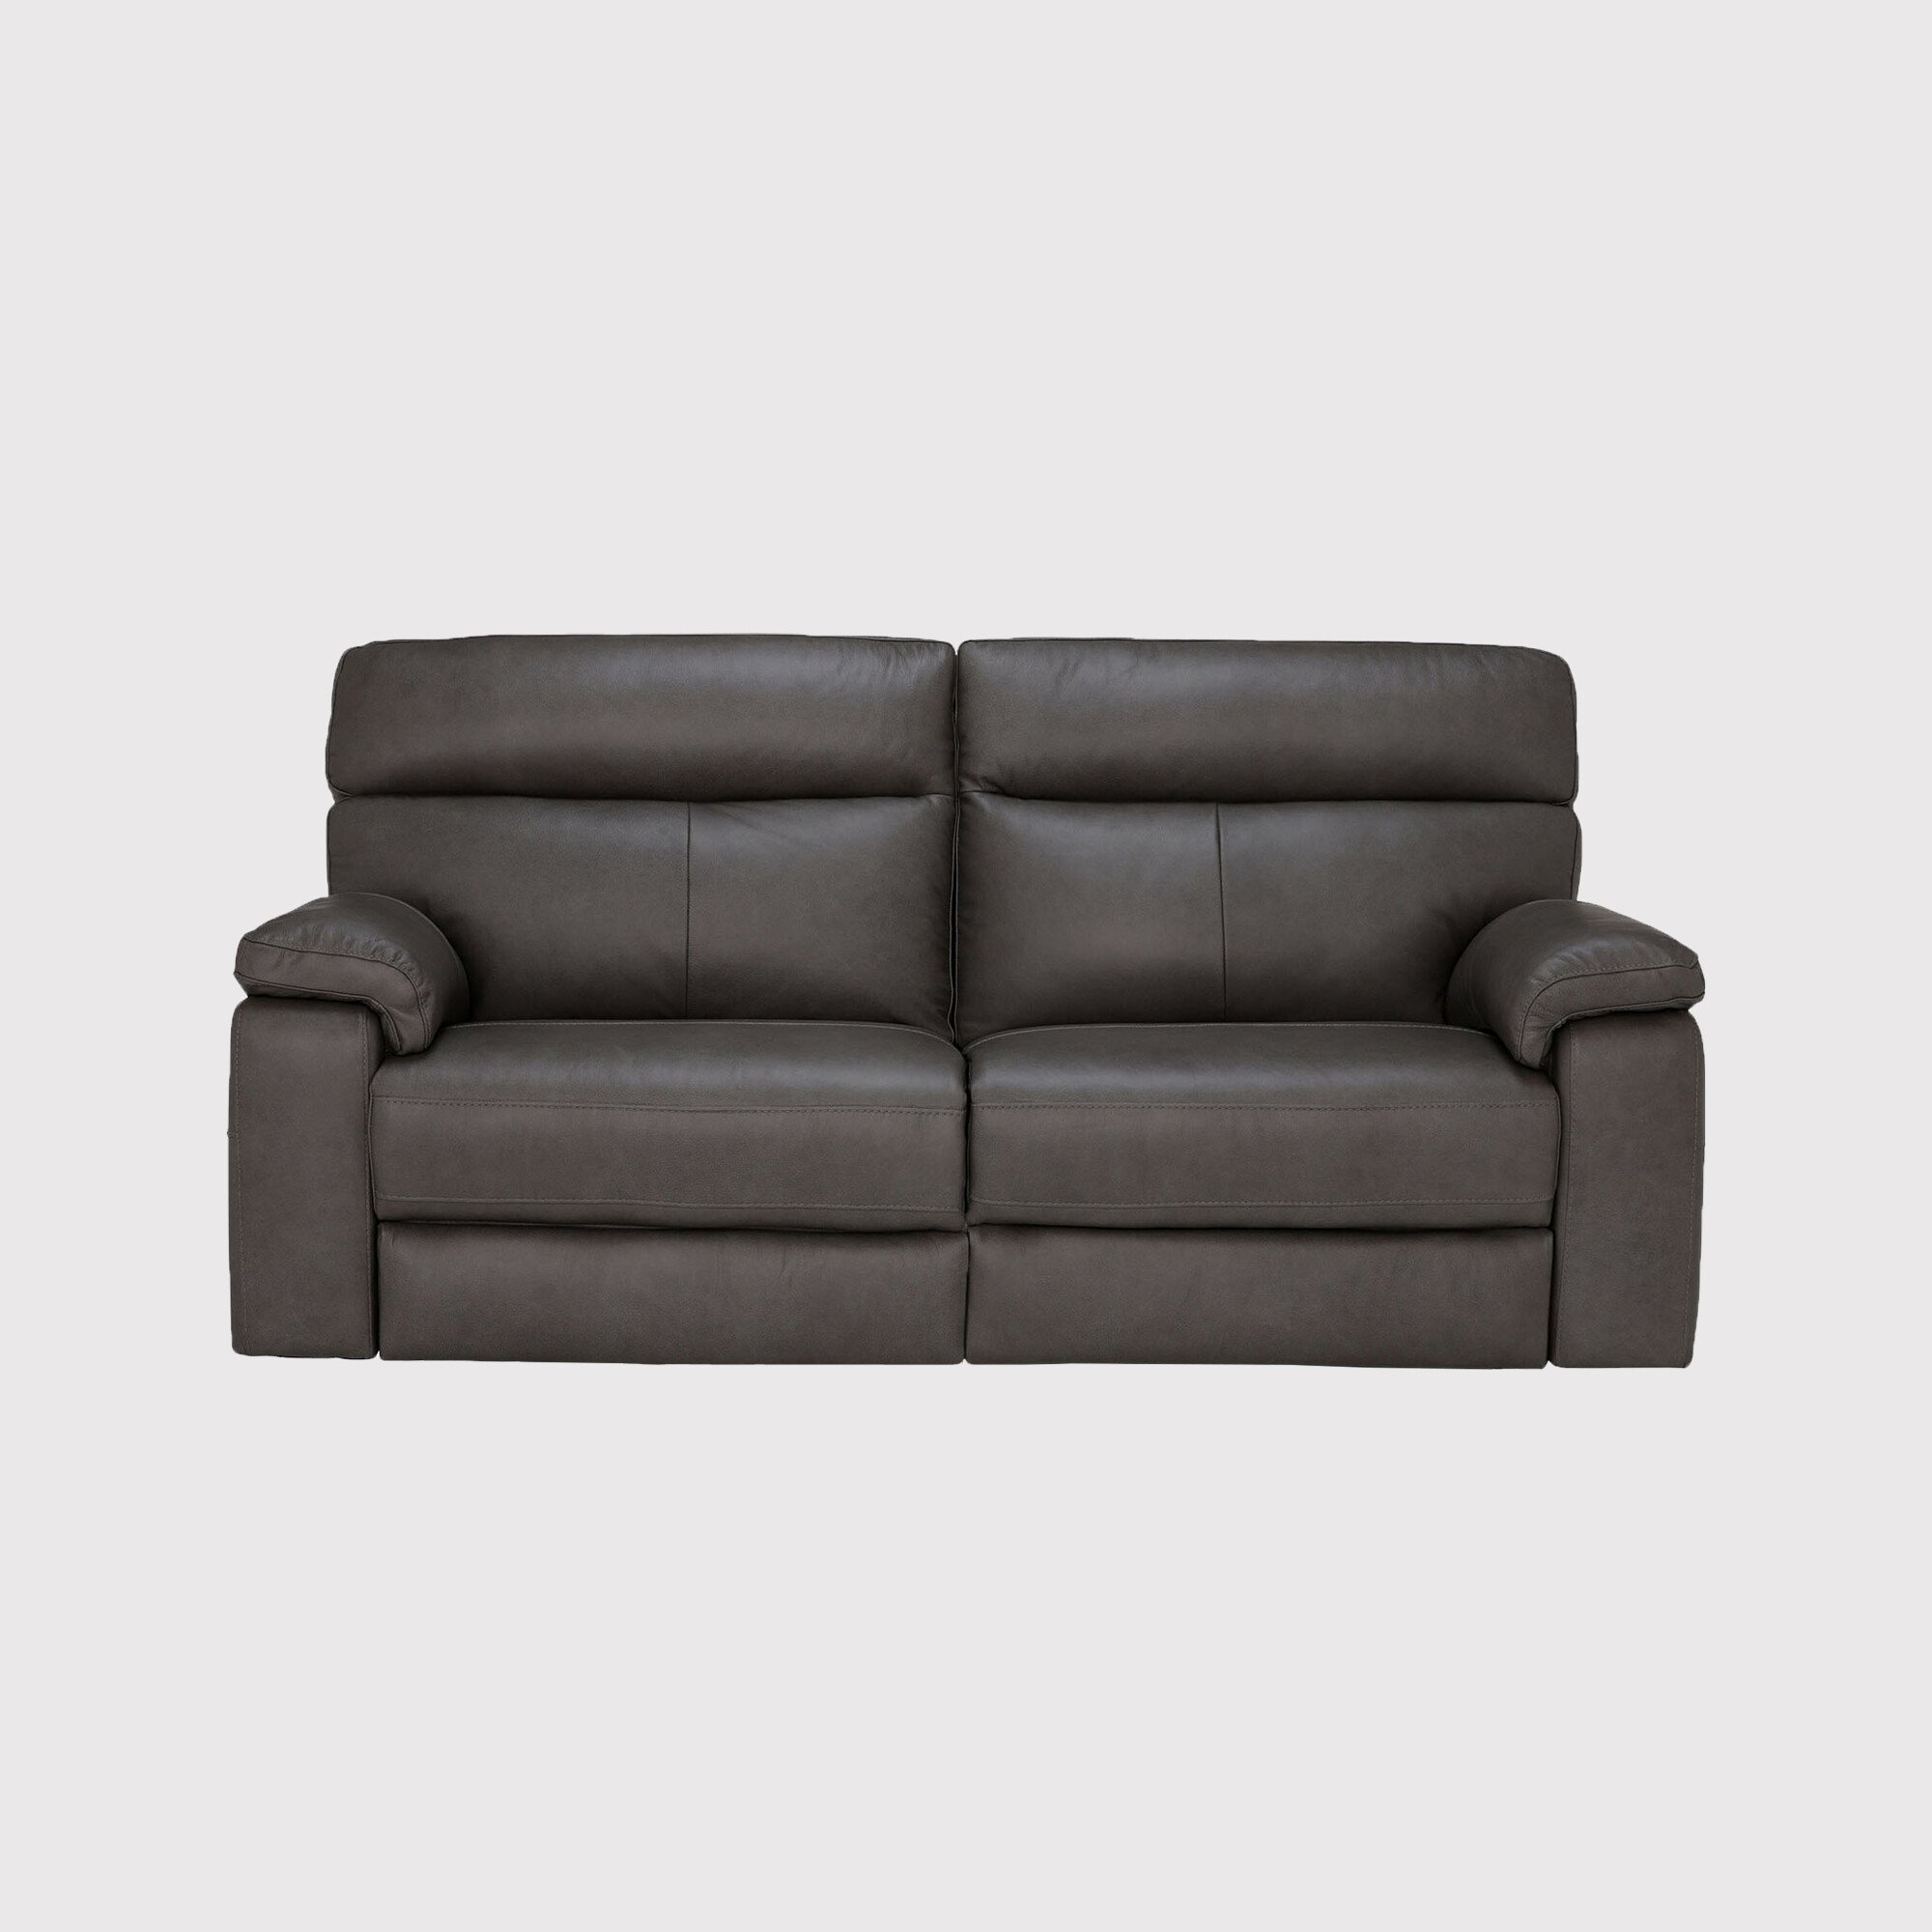 Clark 3 Seater Recliner Sofa With Power Motion Recliner, Brown Leather | Barker & Stonehouse